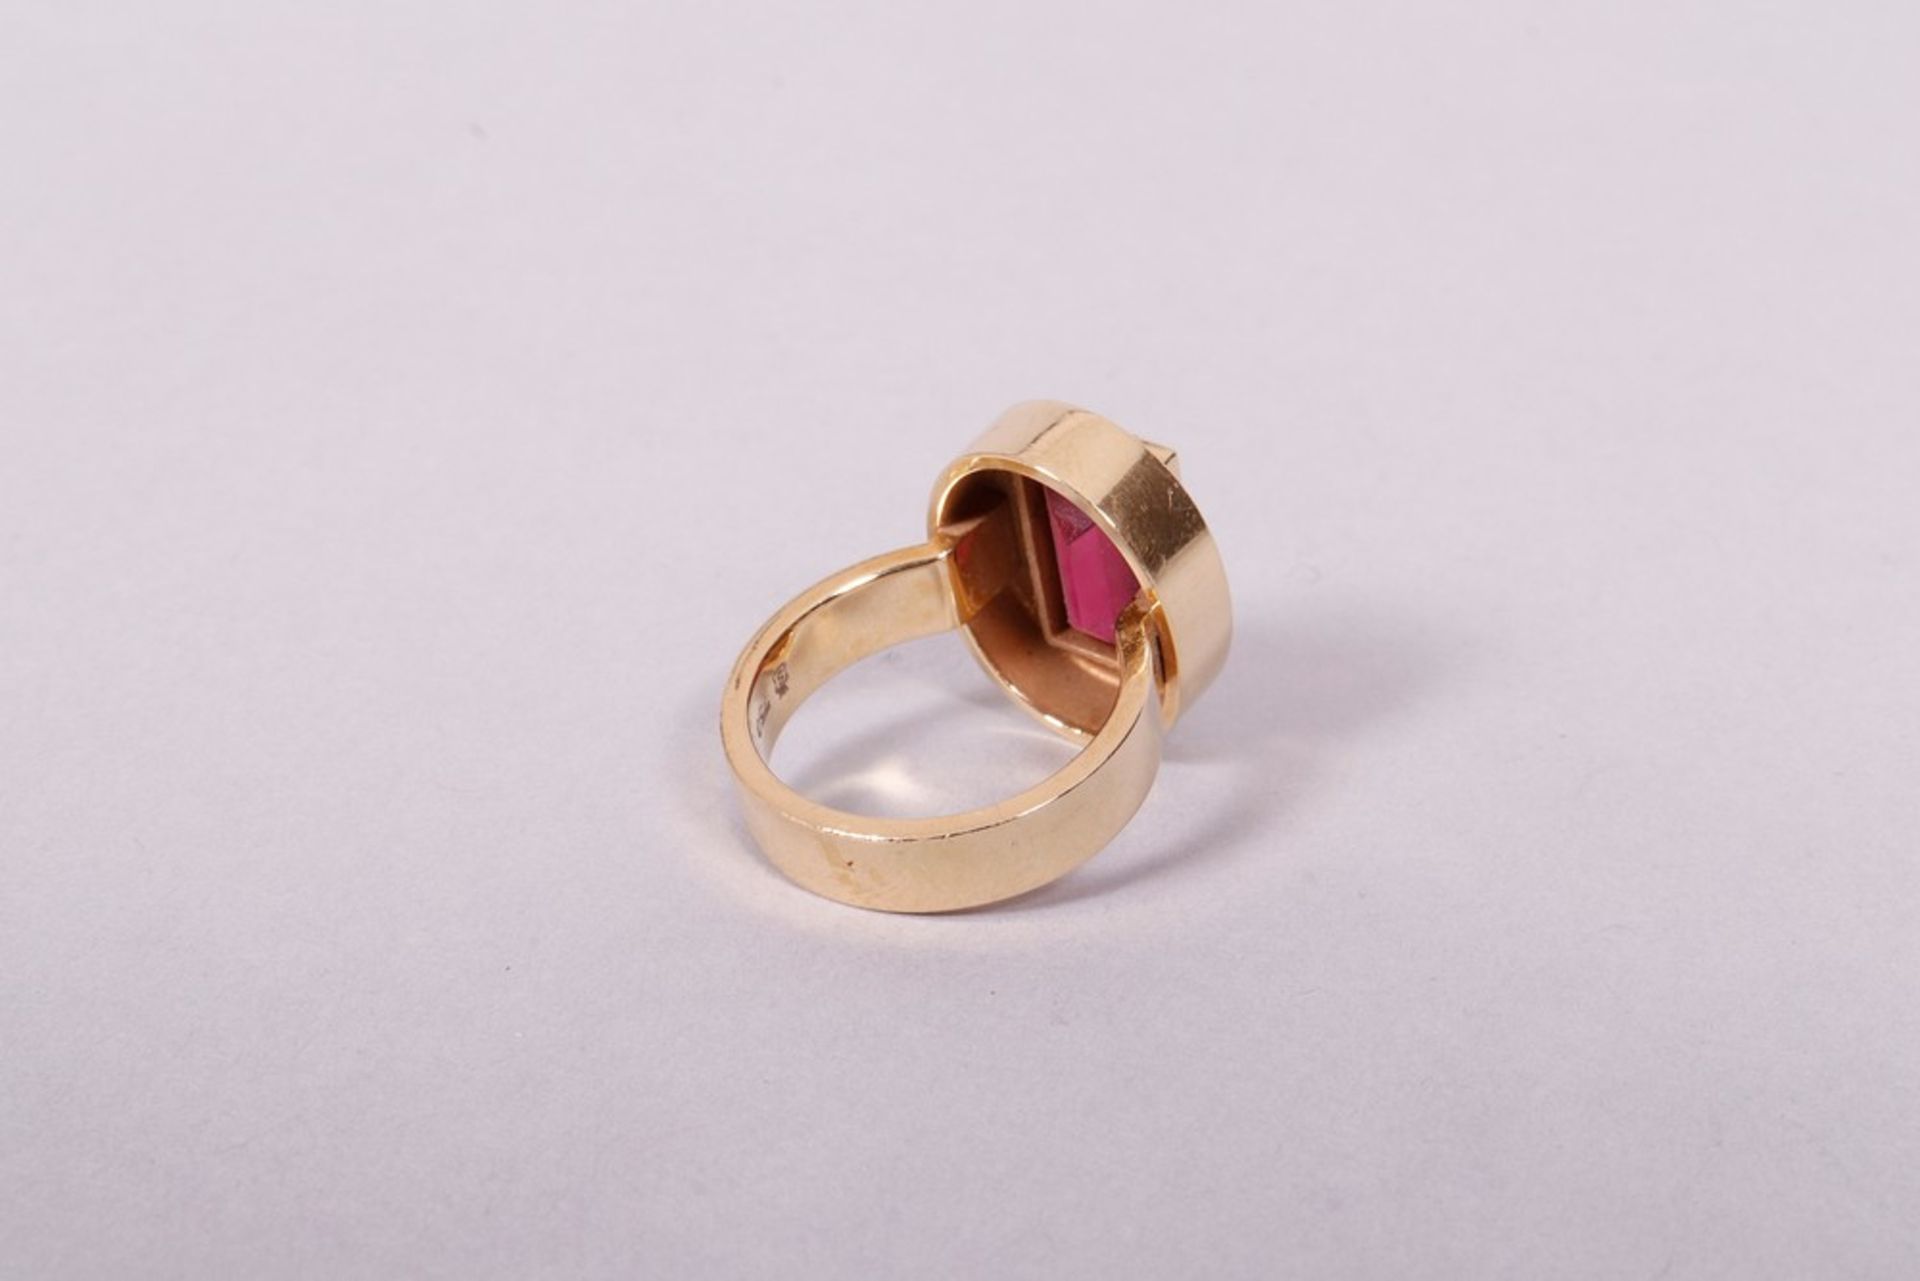 Ring with an oval structure, 750 gold, manufacturer Sack, Lübeck - Image 3 of 4